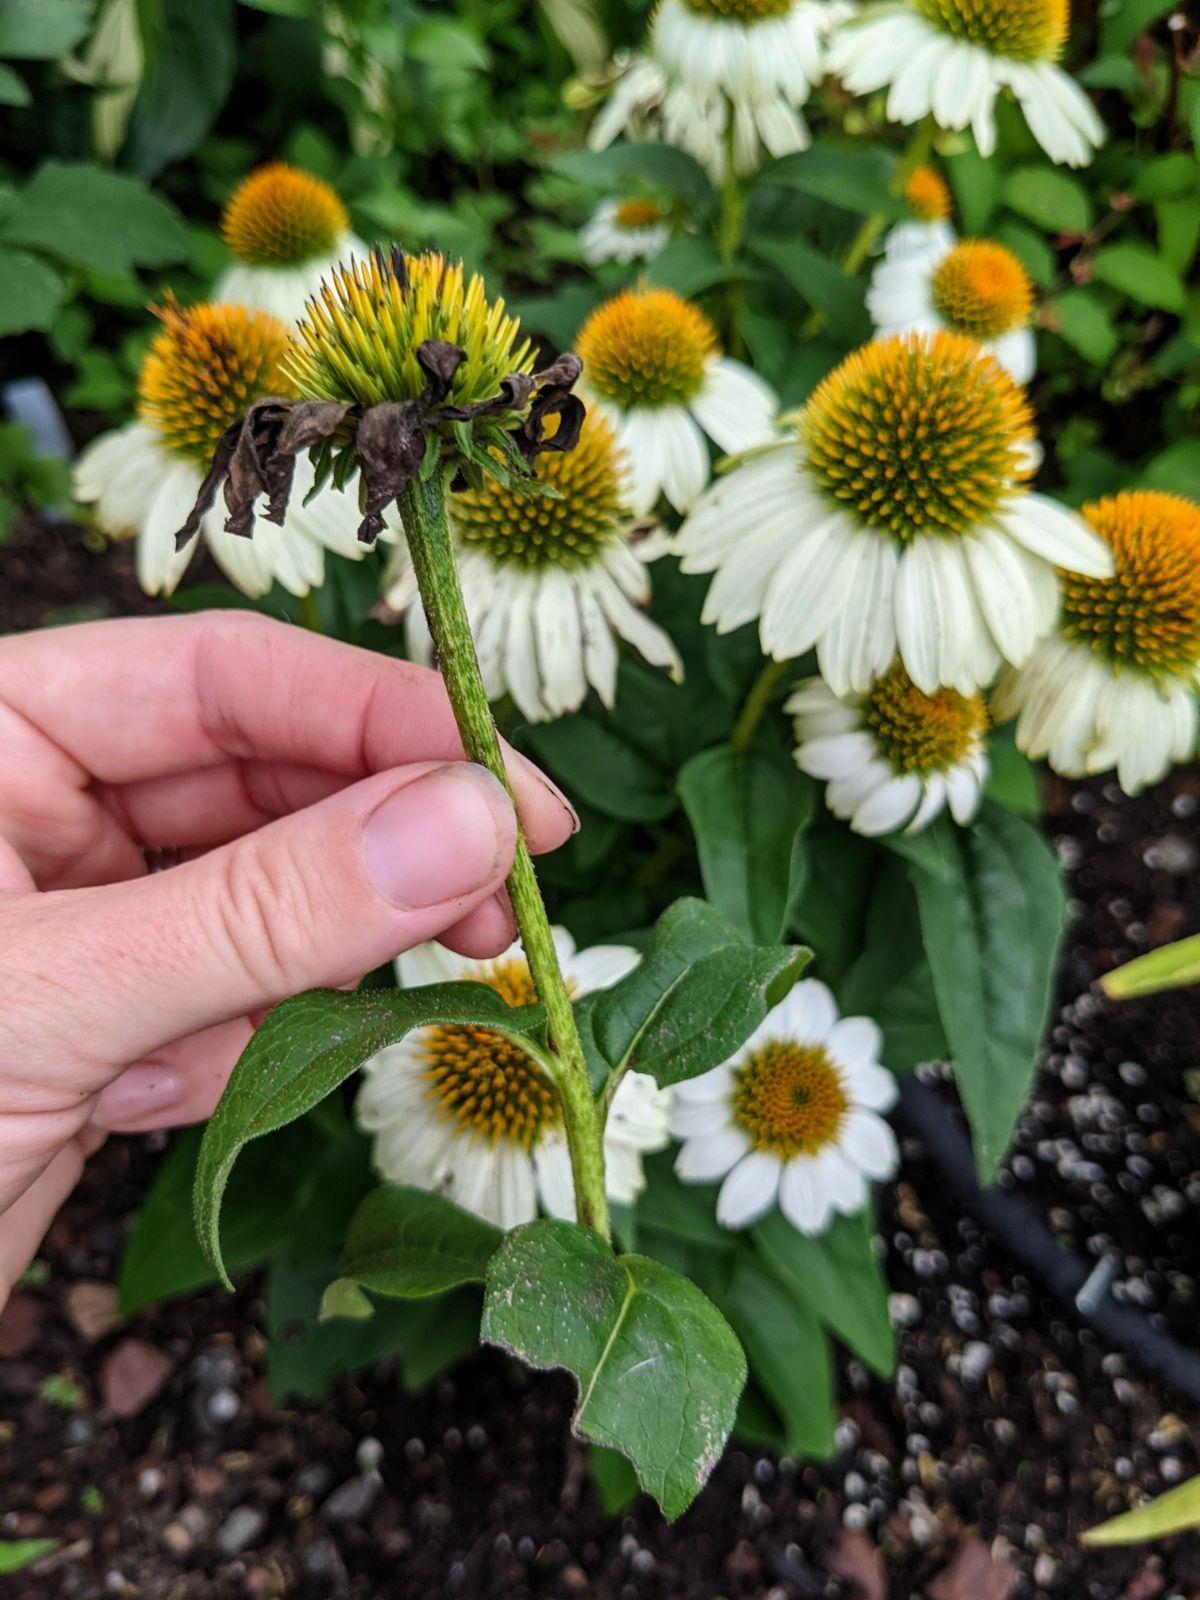 Removing a white coneflower deadhead from the echinacea plant